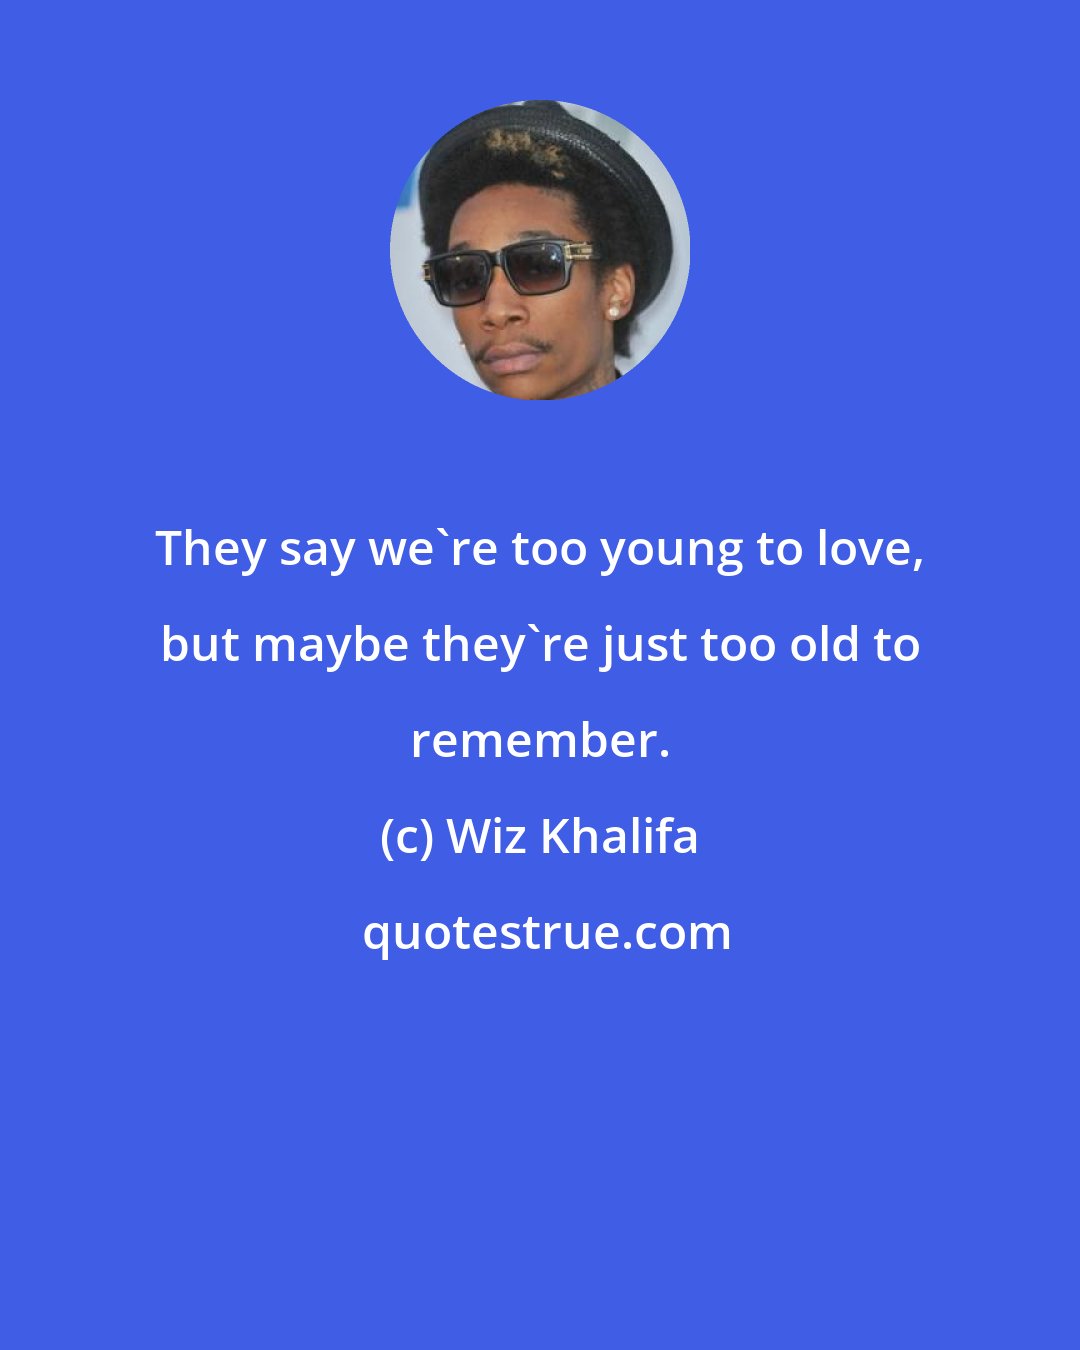 Wiz Khalifa: They say we're too young to love, but maybe they're just too old to remember.